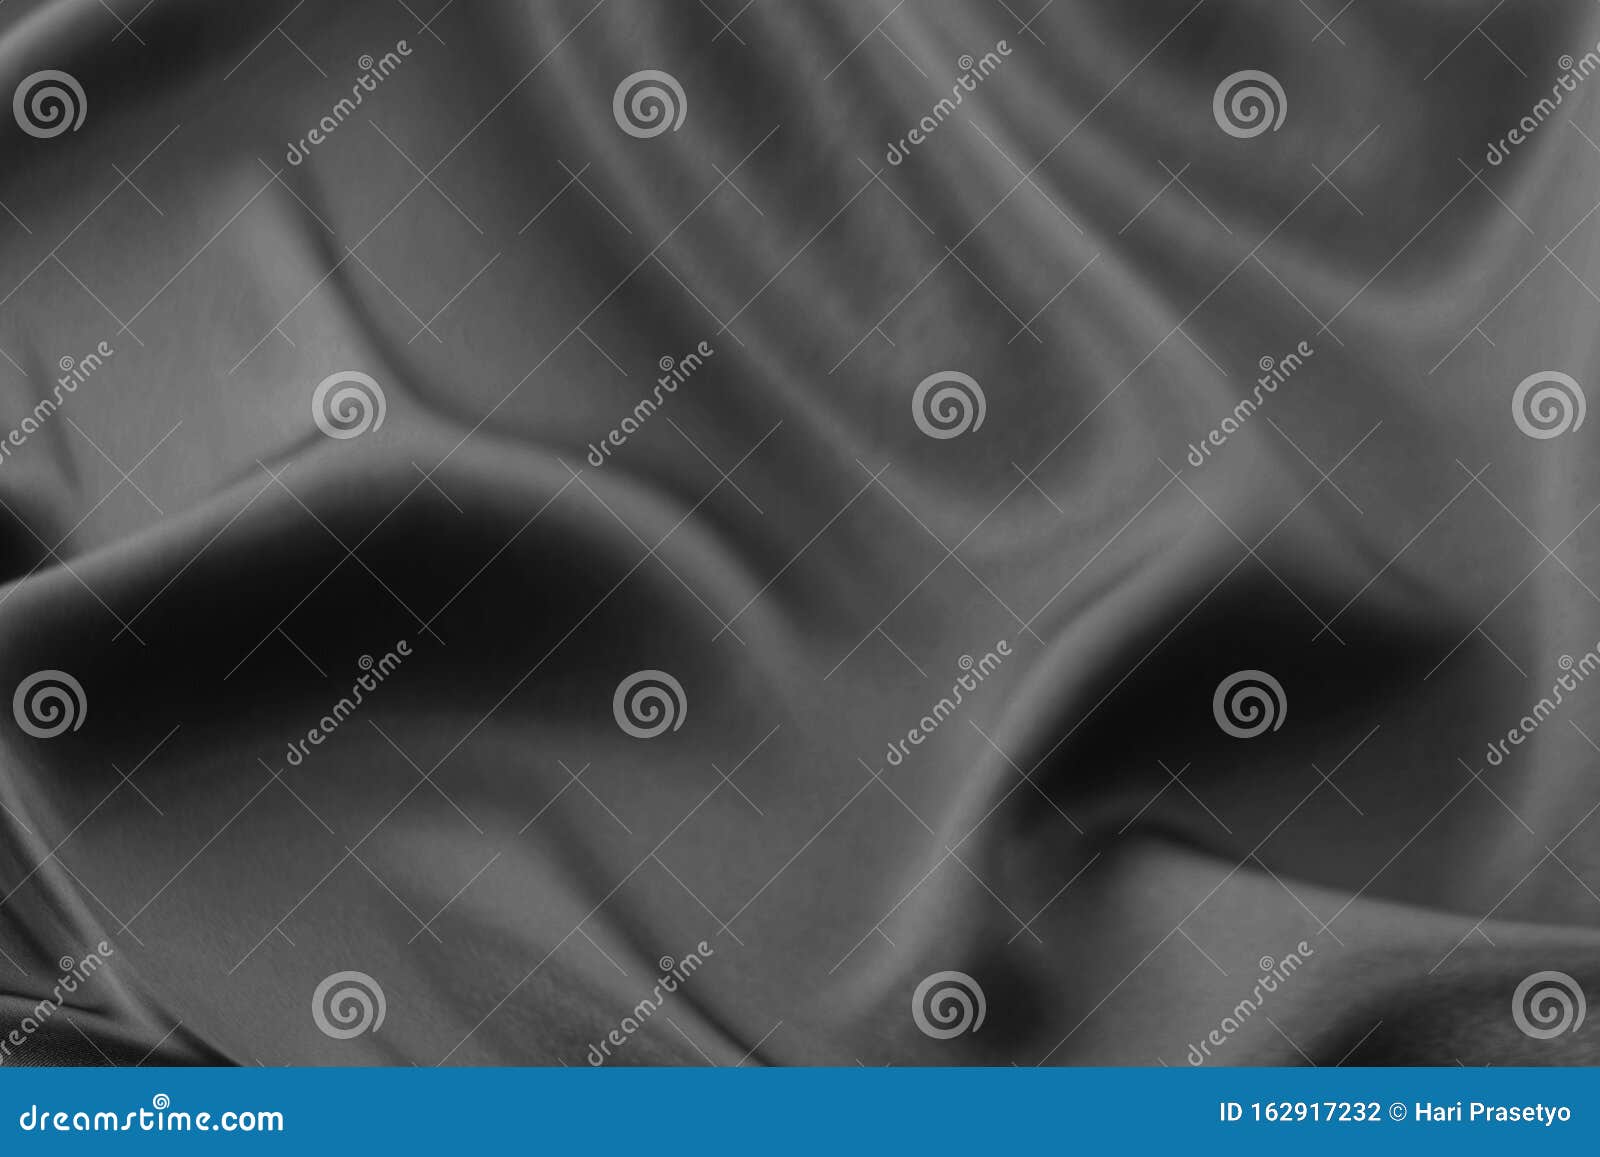 Abstract Black And White Blurred Background Vector Illustration